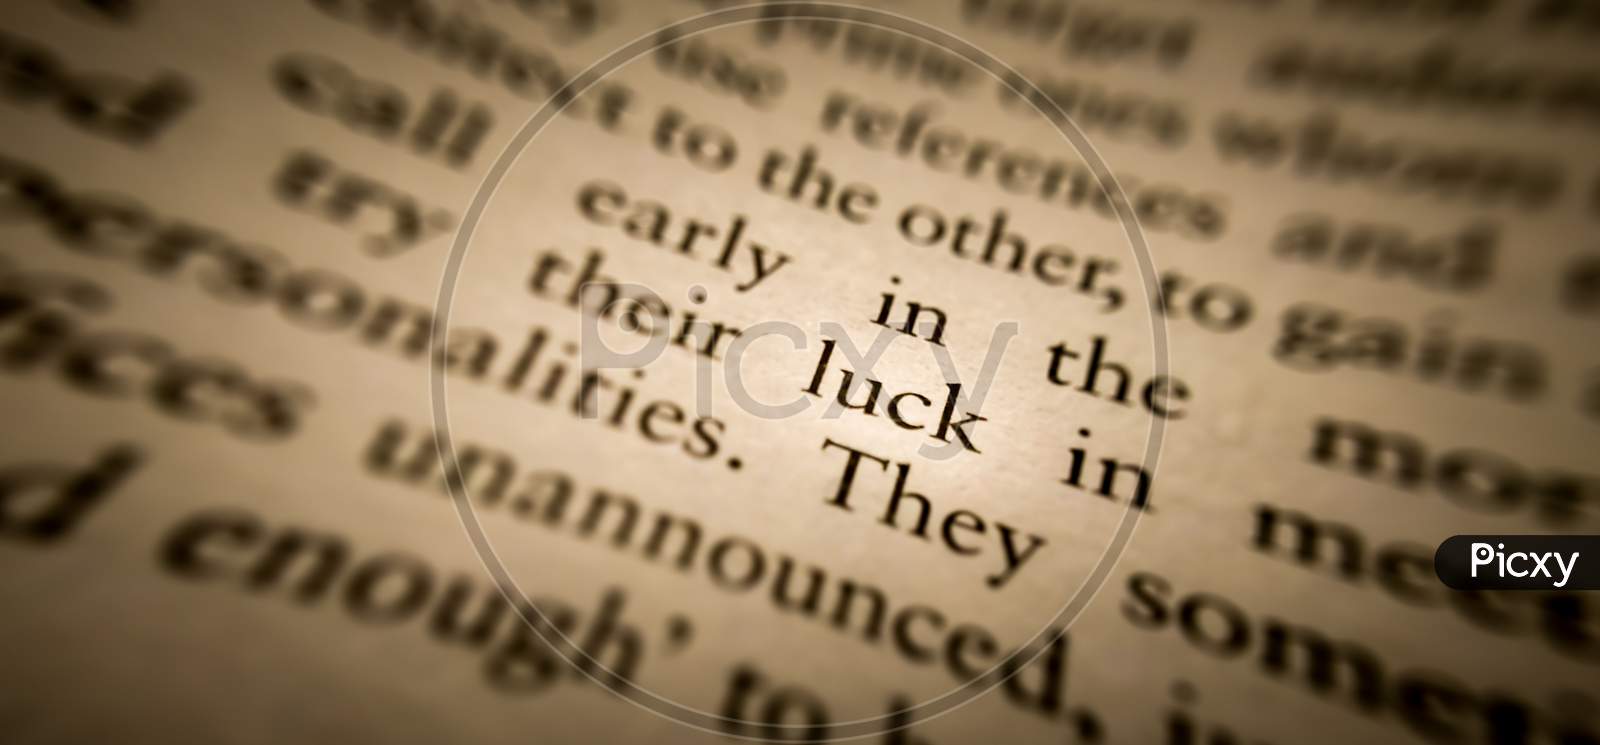 Luck Word Highlighted And Focused In An Old Book.